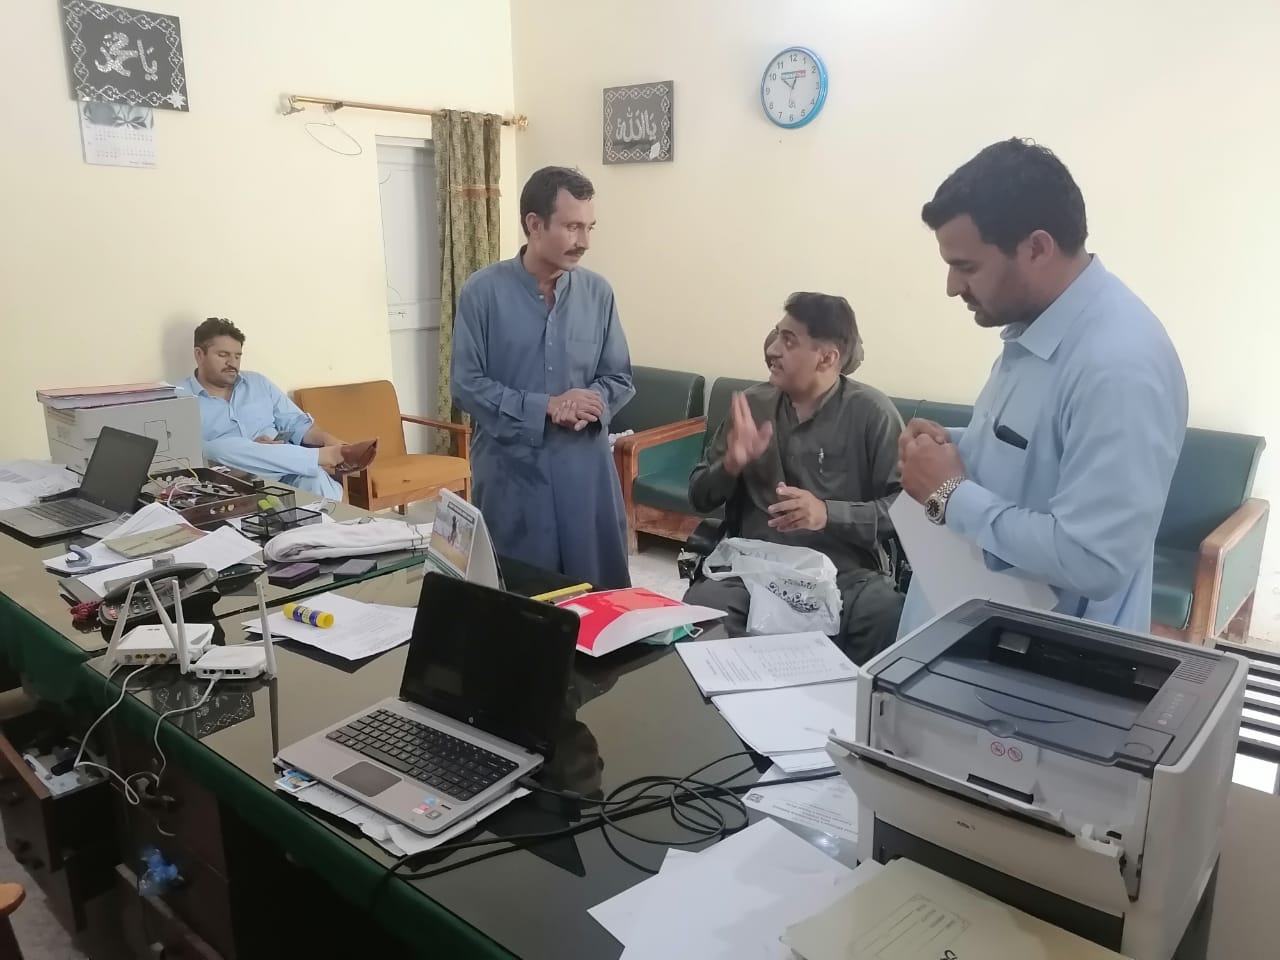 CIP Bannu Region holds advocacy meeting with District Officer Social Welfare Mr. Rizwan Khattak and In-charge disability certificate section Saqib khan to discuss earliest disposal of 600 online applications related to disability certificates